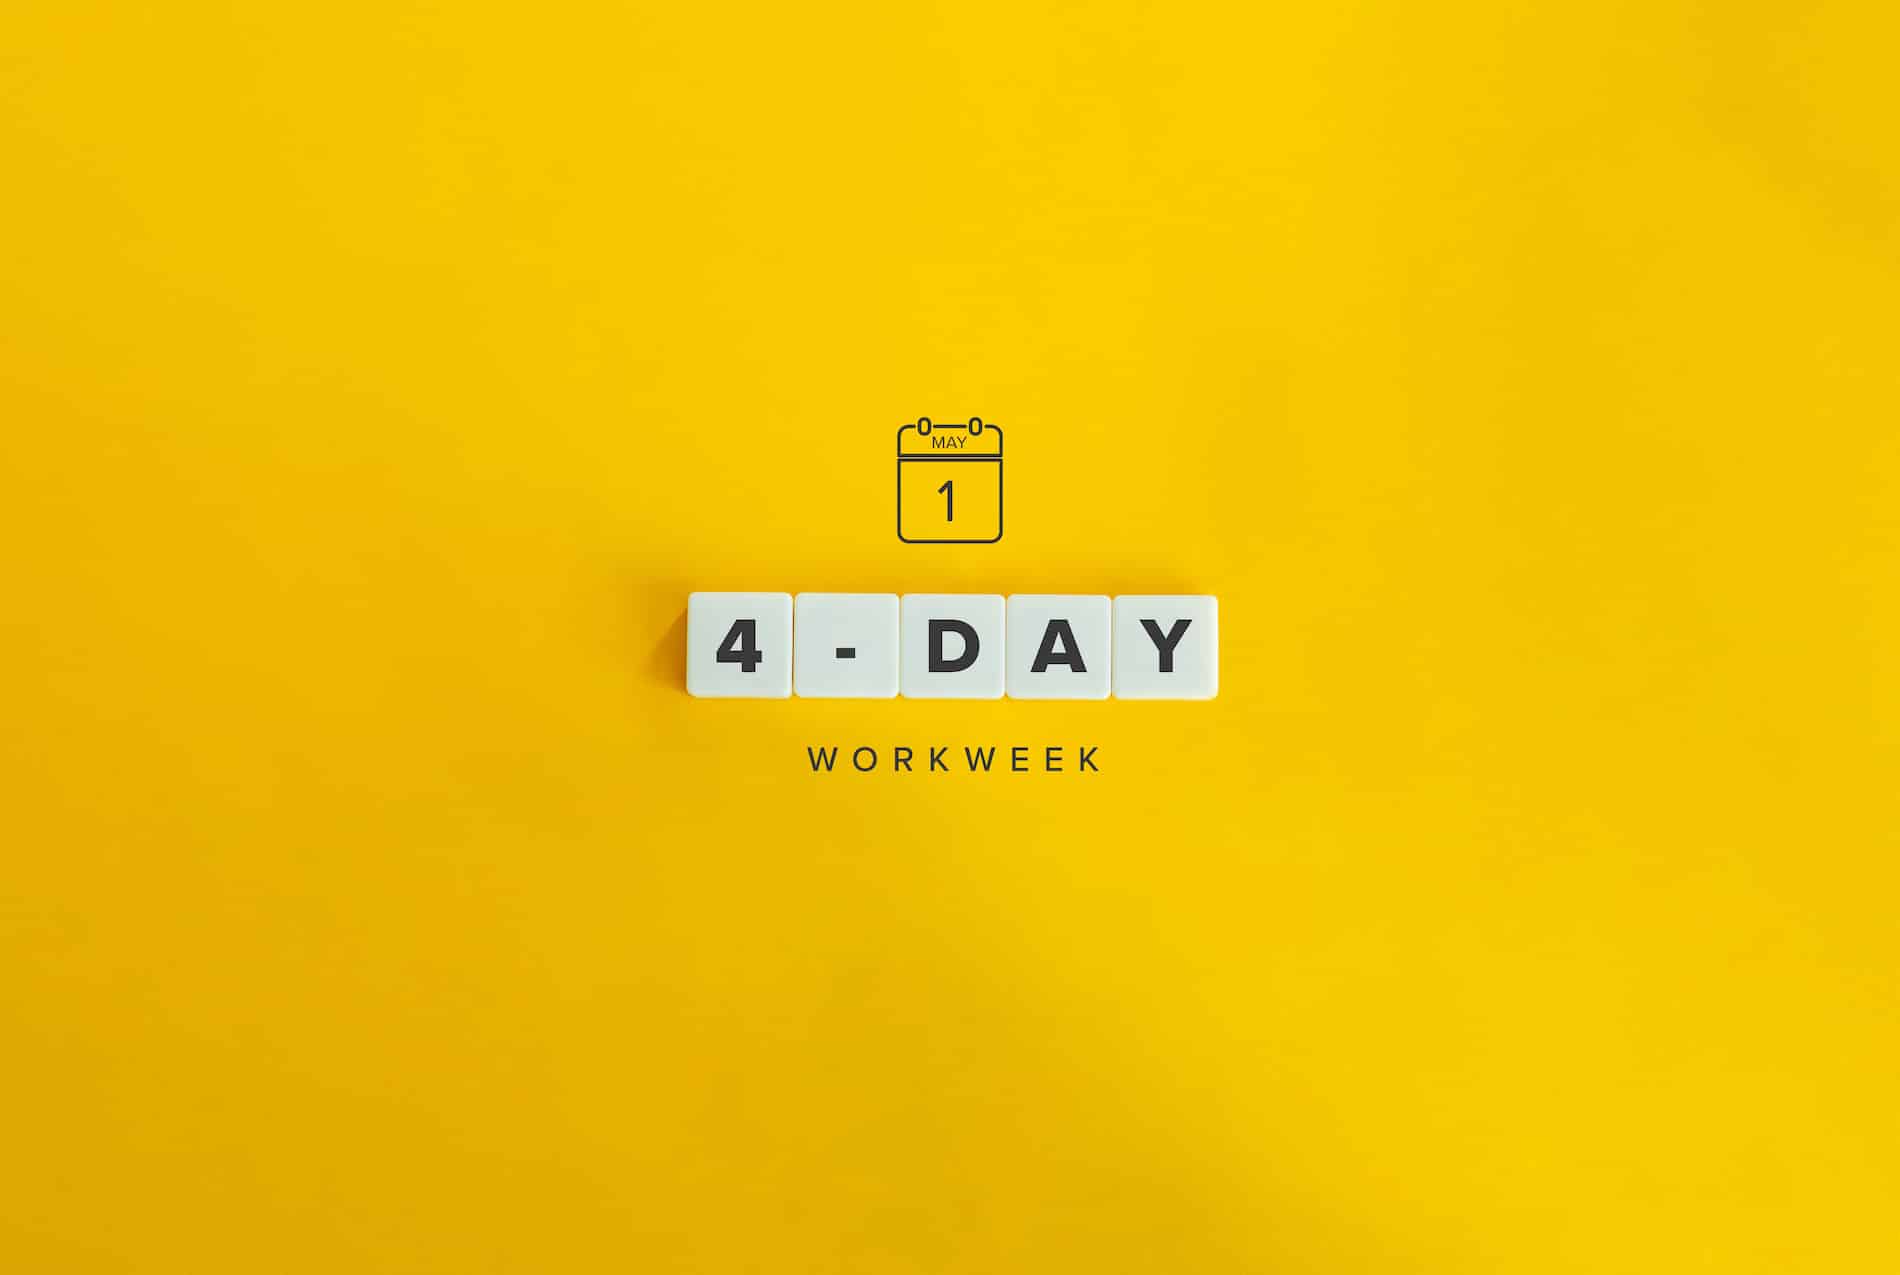 banner and concept. Block letters on bright orange background reading "4 day workweek"